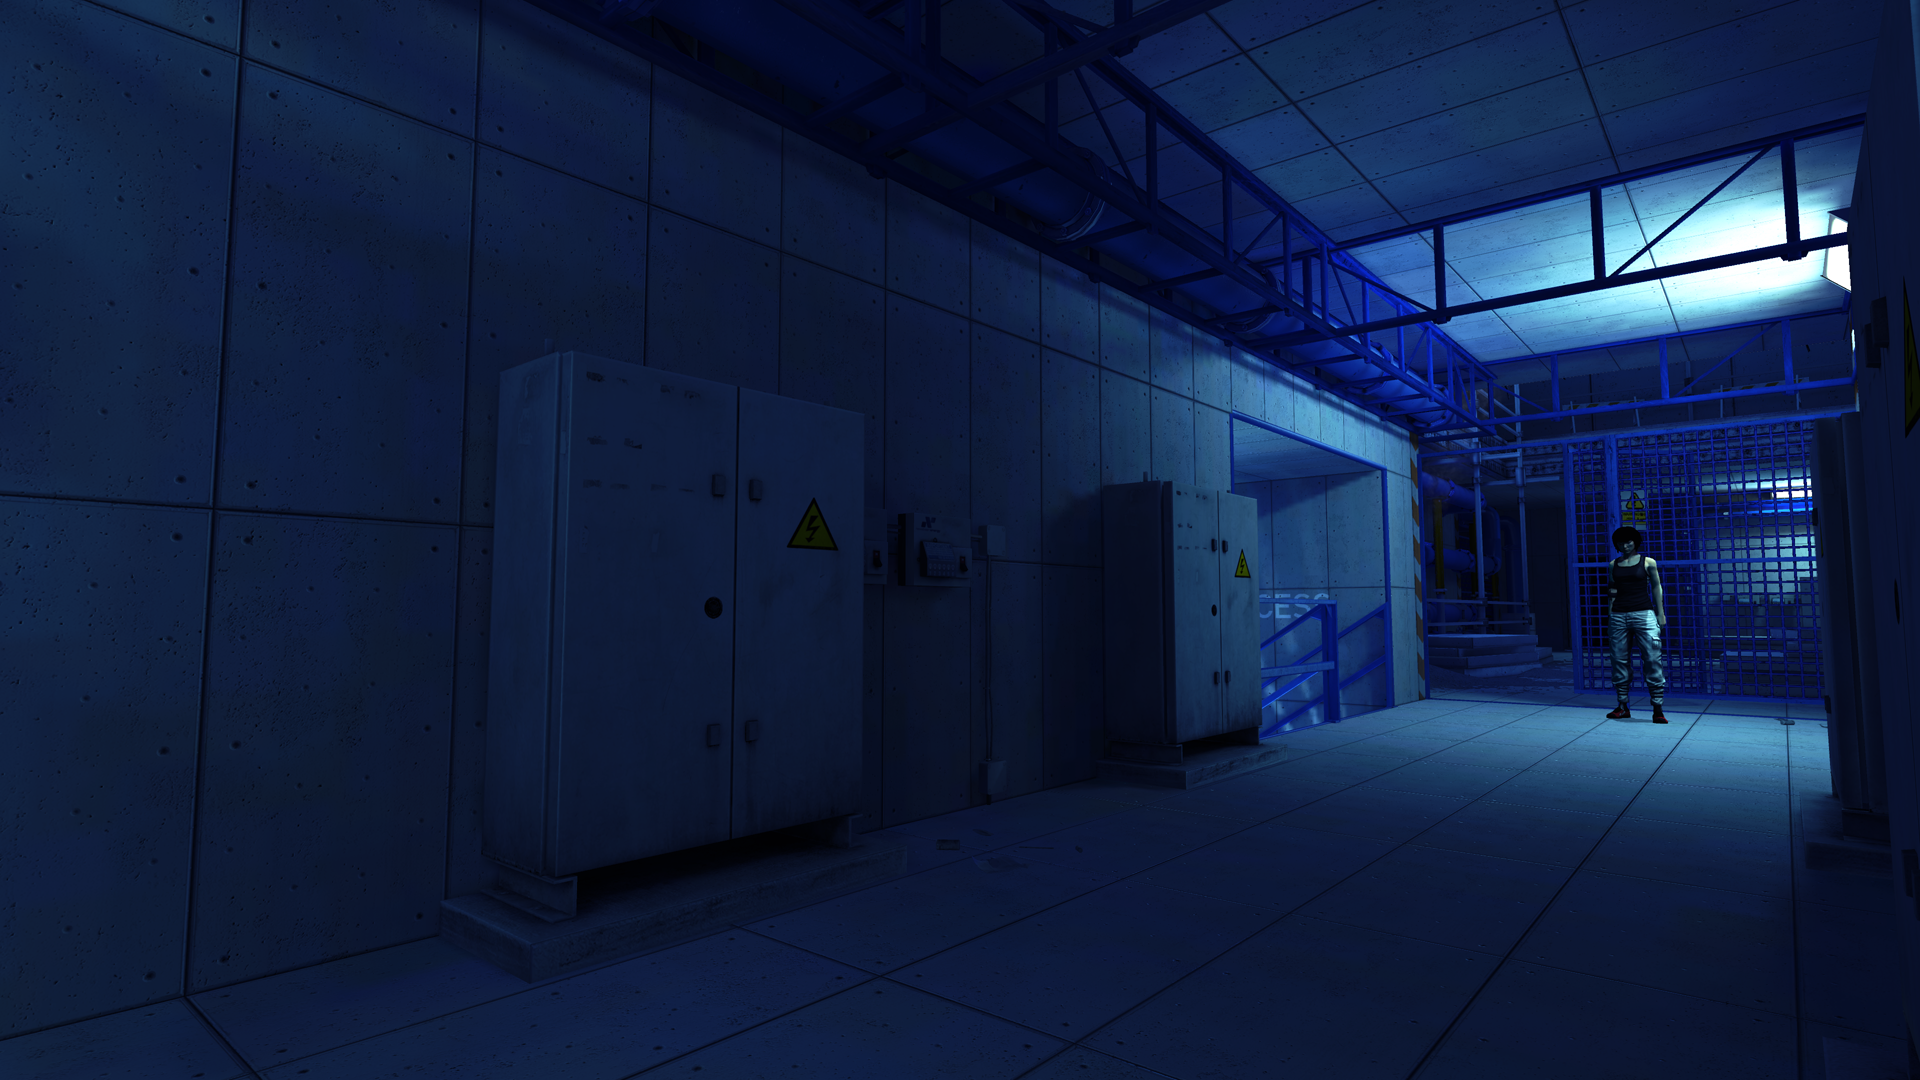 mirrorsedge_2014_01_02_22_47_26_306_by_dio141-d70keoz.png